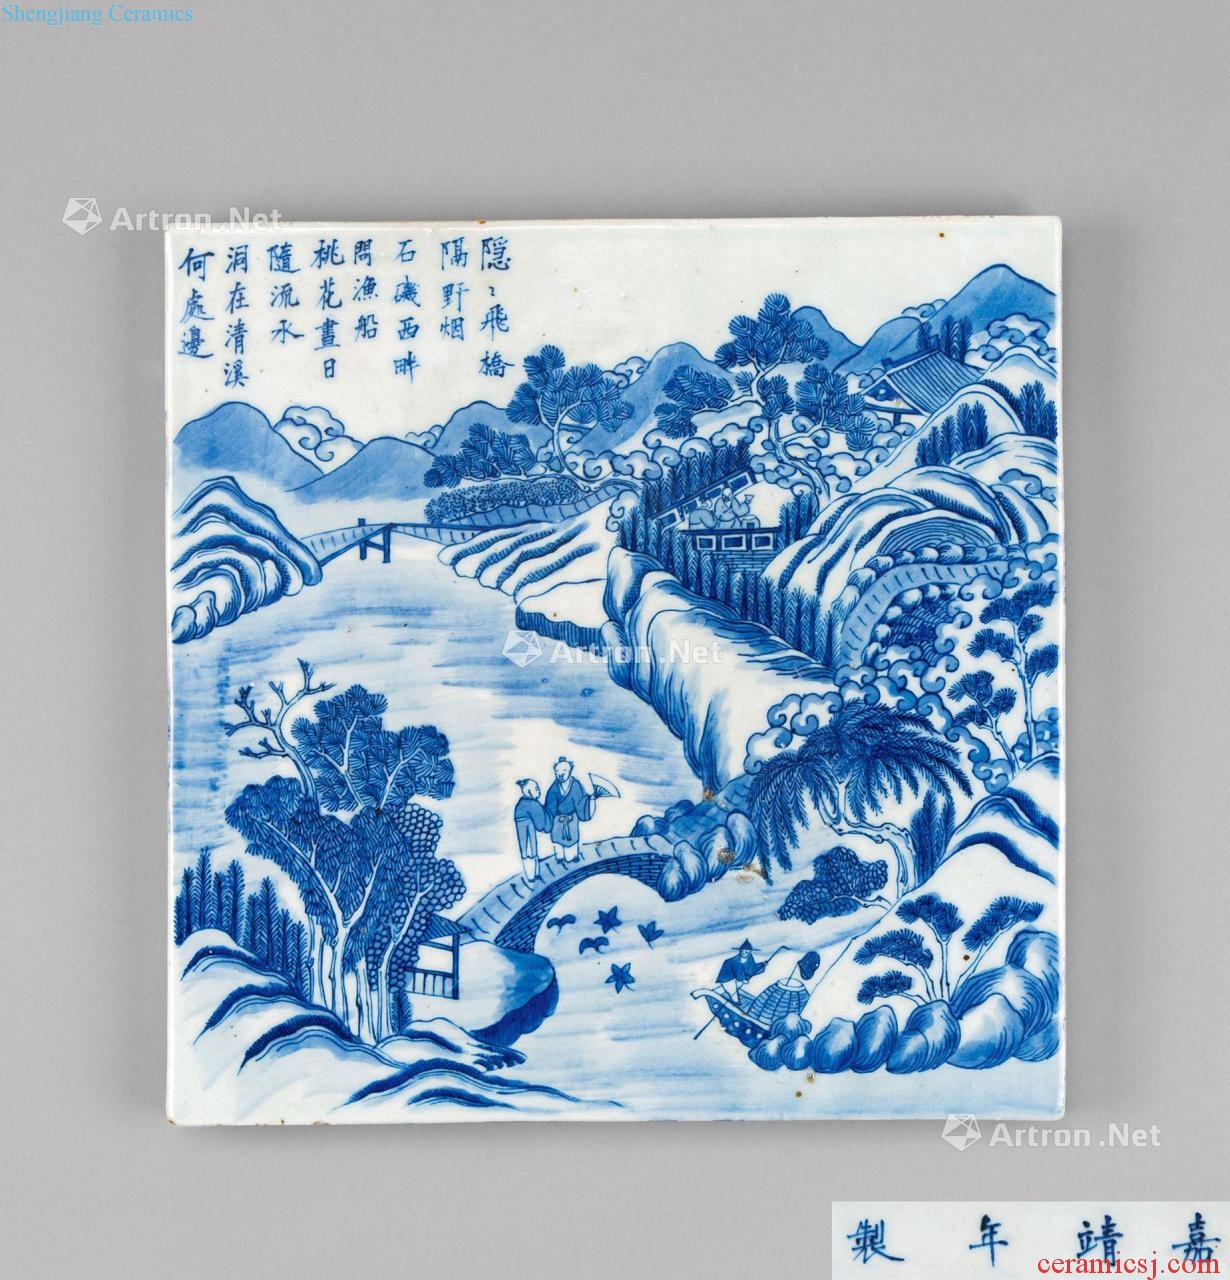 In the qing dynasty Blue and white landscape poetry porcelain plate